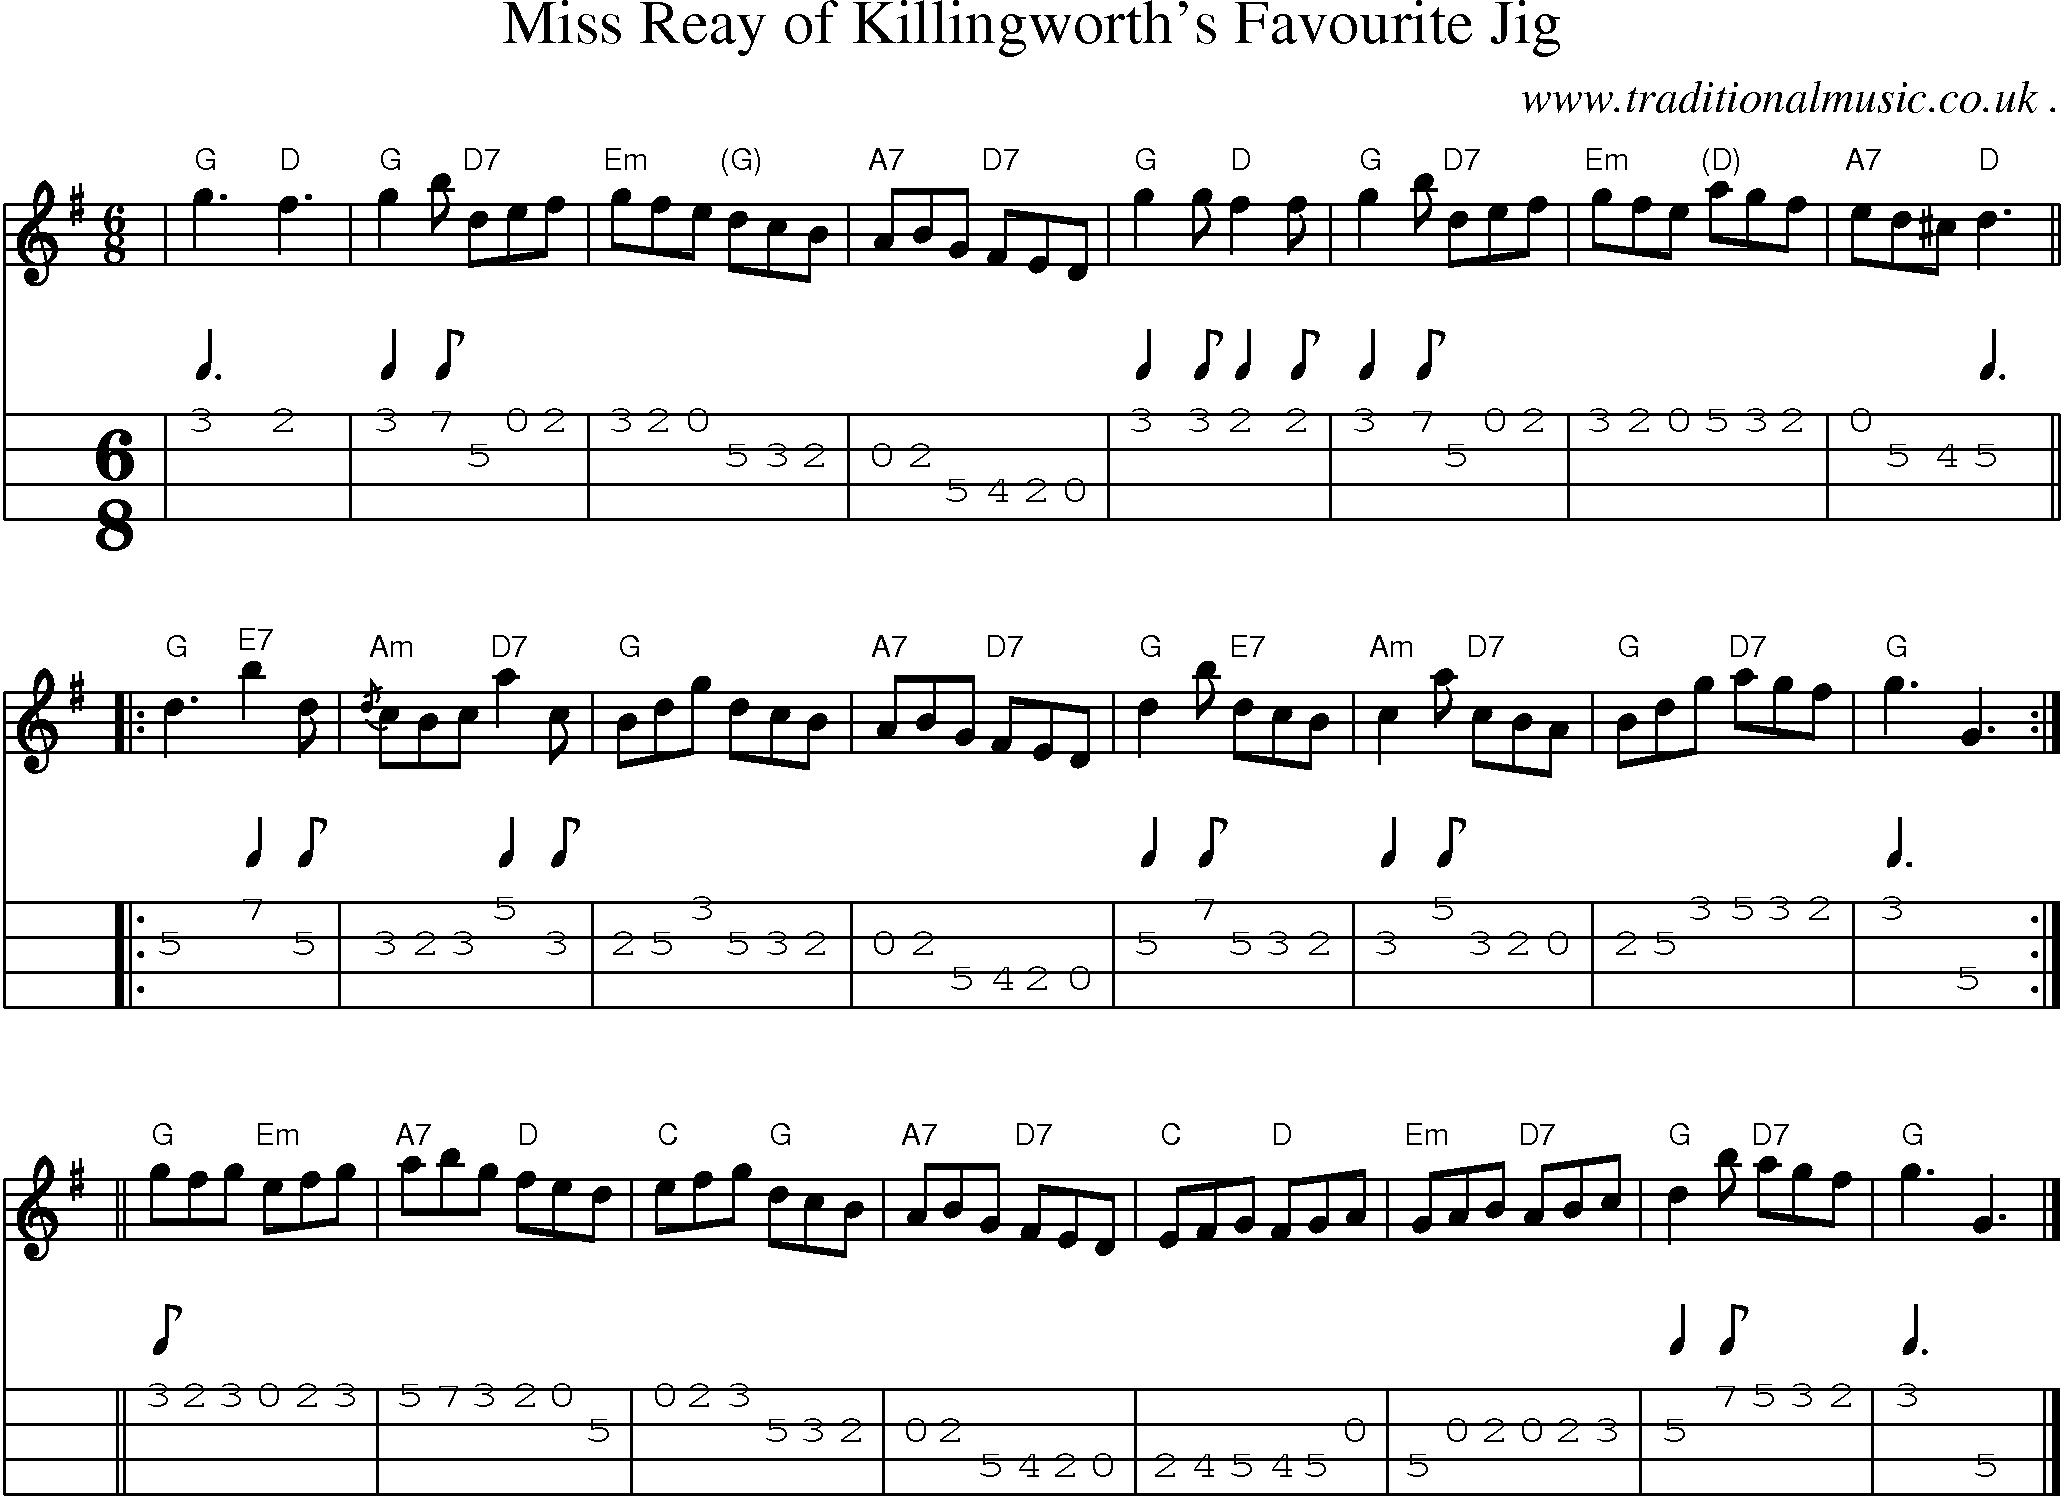 Sheet-music  score, Chords and Mandolin Tabs for Miss Reay Of Killingworths Favourite Jig